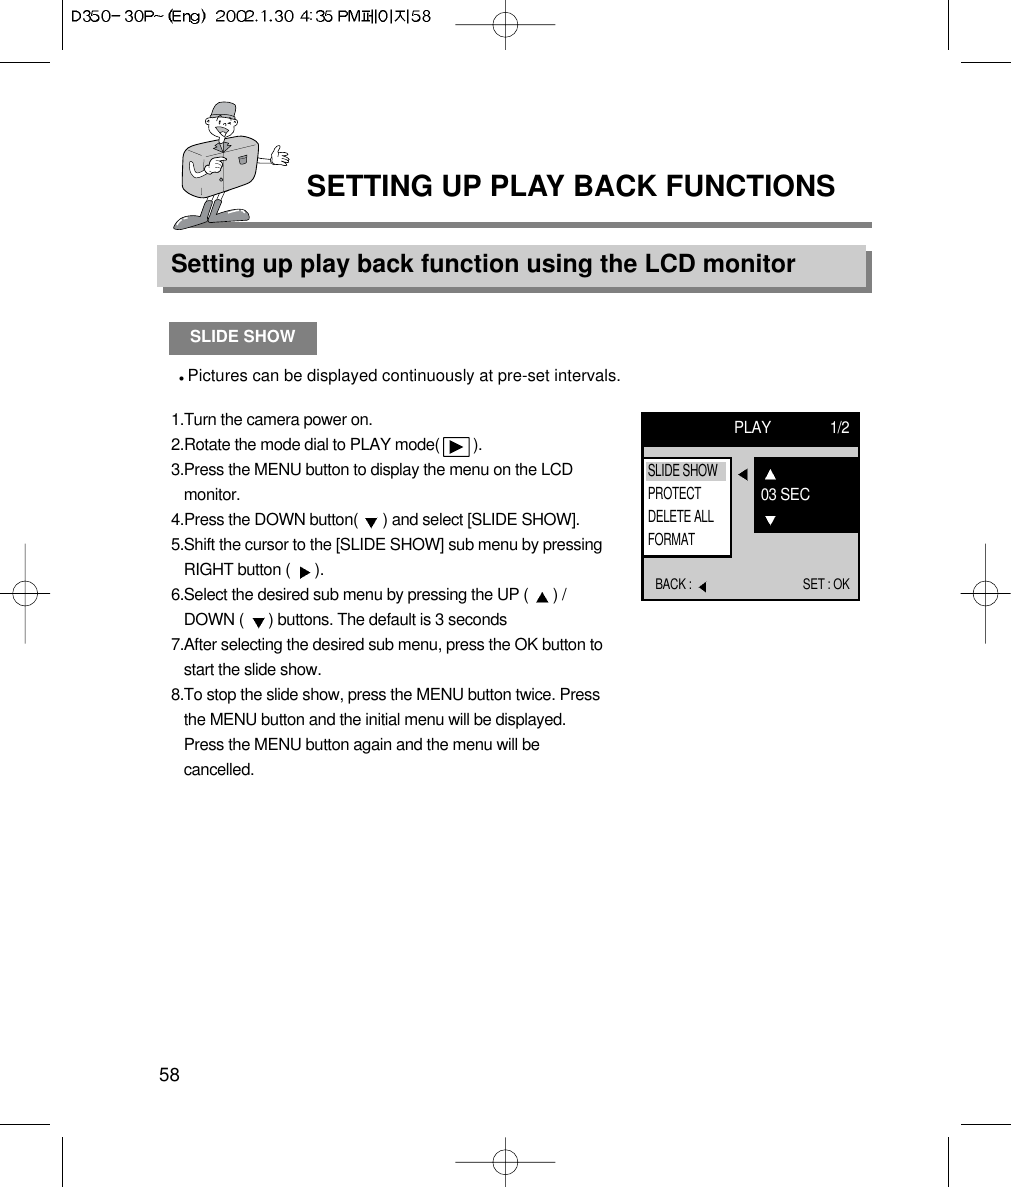 Setting up play back function using the LCD monitor58SETTING UP PLAY BACK FUNCTIONSSLIDE SHOWPictures can be displayed continuously at pre-set intervals.1.Turn the camera power on.2.Rotate the mode dial to PLAY mode(        ).3.Press the MENU button to display the menu on the LCDmonitor.4.Press the DOWN button(  ) and select [SLIDE SHOW].5.Shift the cursor to the [SLIDE SHOW] sub menu by pressingRIGHT button (  ).6.Select the desired sub menu by pressing the UP (  ) /DOWN (  ) buttons. The default is 3 seconds7.After selecting the desired sub menu, press the OK button tostart the slide show.8.To stop the slide show, press the MENU button twice. Pressthe MENU button and the initial menu will be displayed.Press the MENU button again and the menu will becancelled.PLAY 1/2BACK :  SET : OK03 SECSLIDE SHOWPROTECTDELETE ALLFORMAT